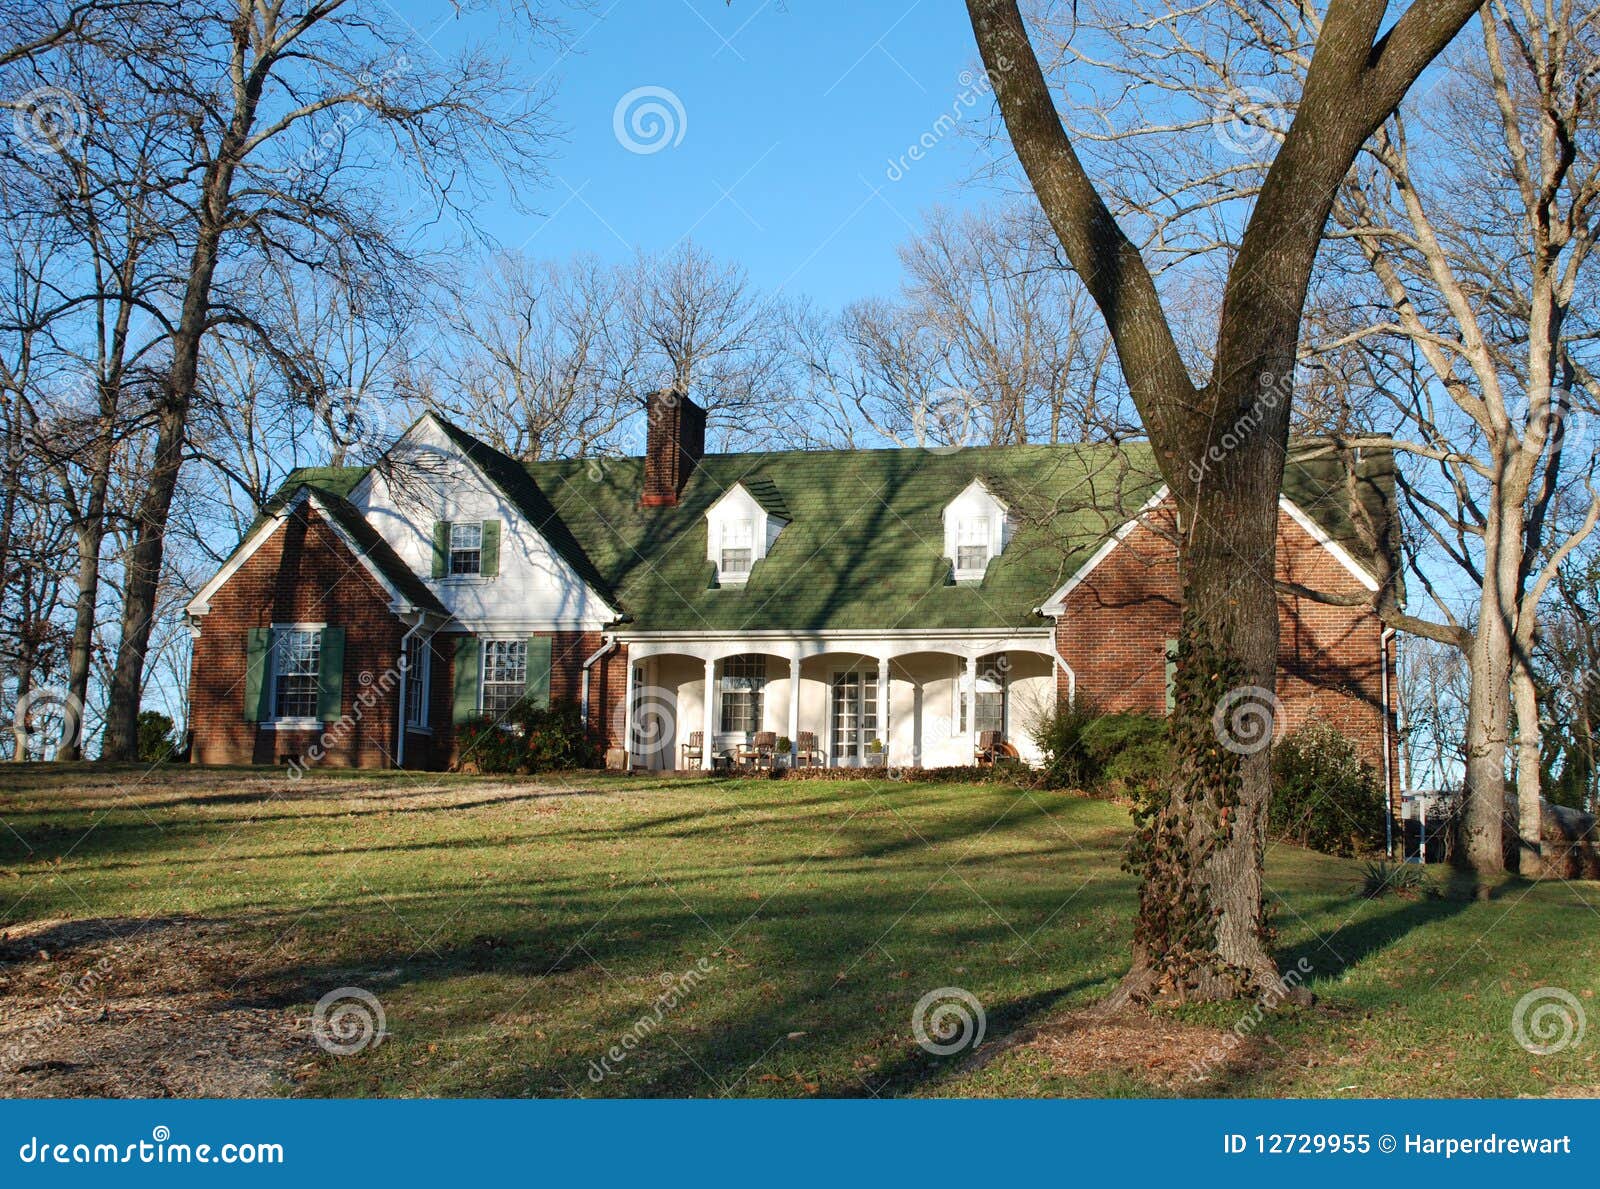 american home on wooded lot 51